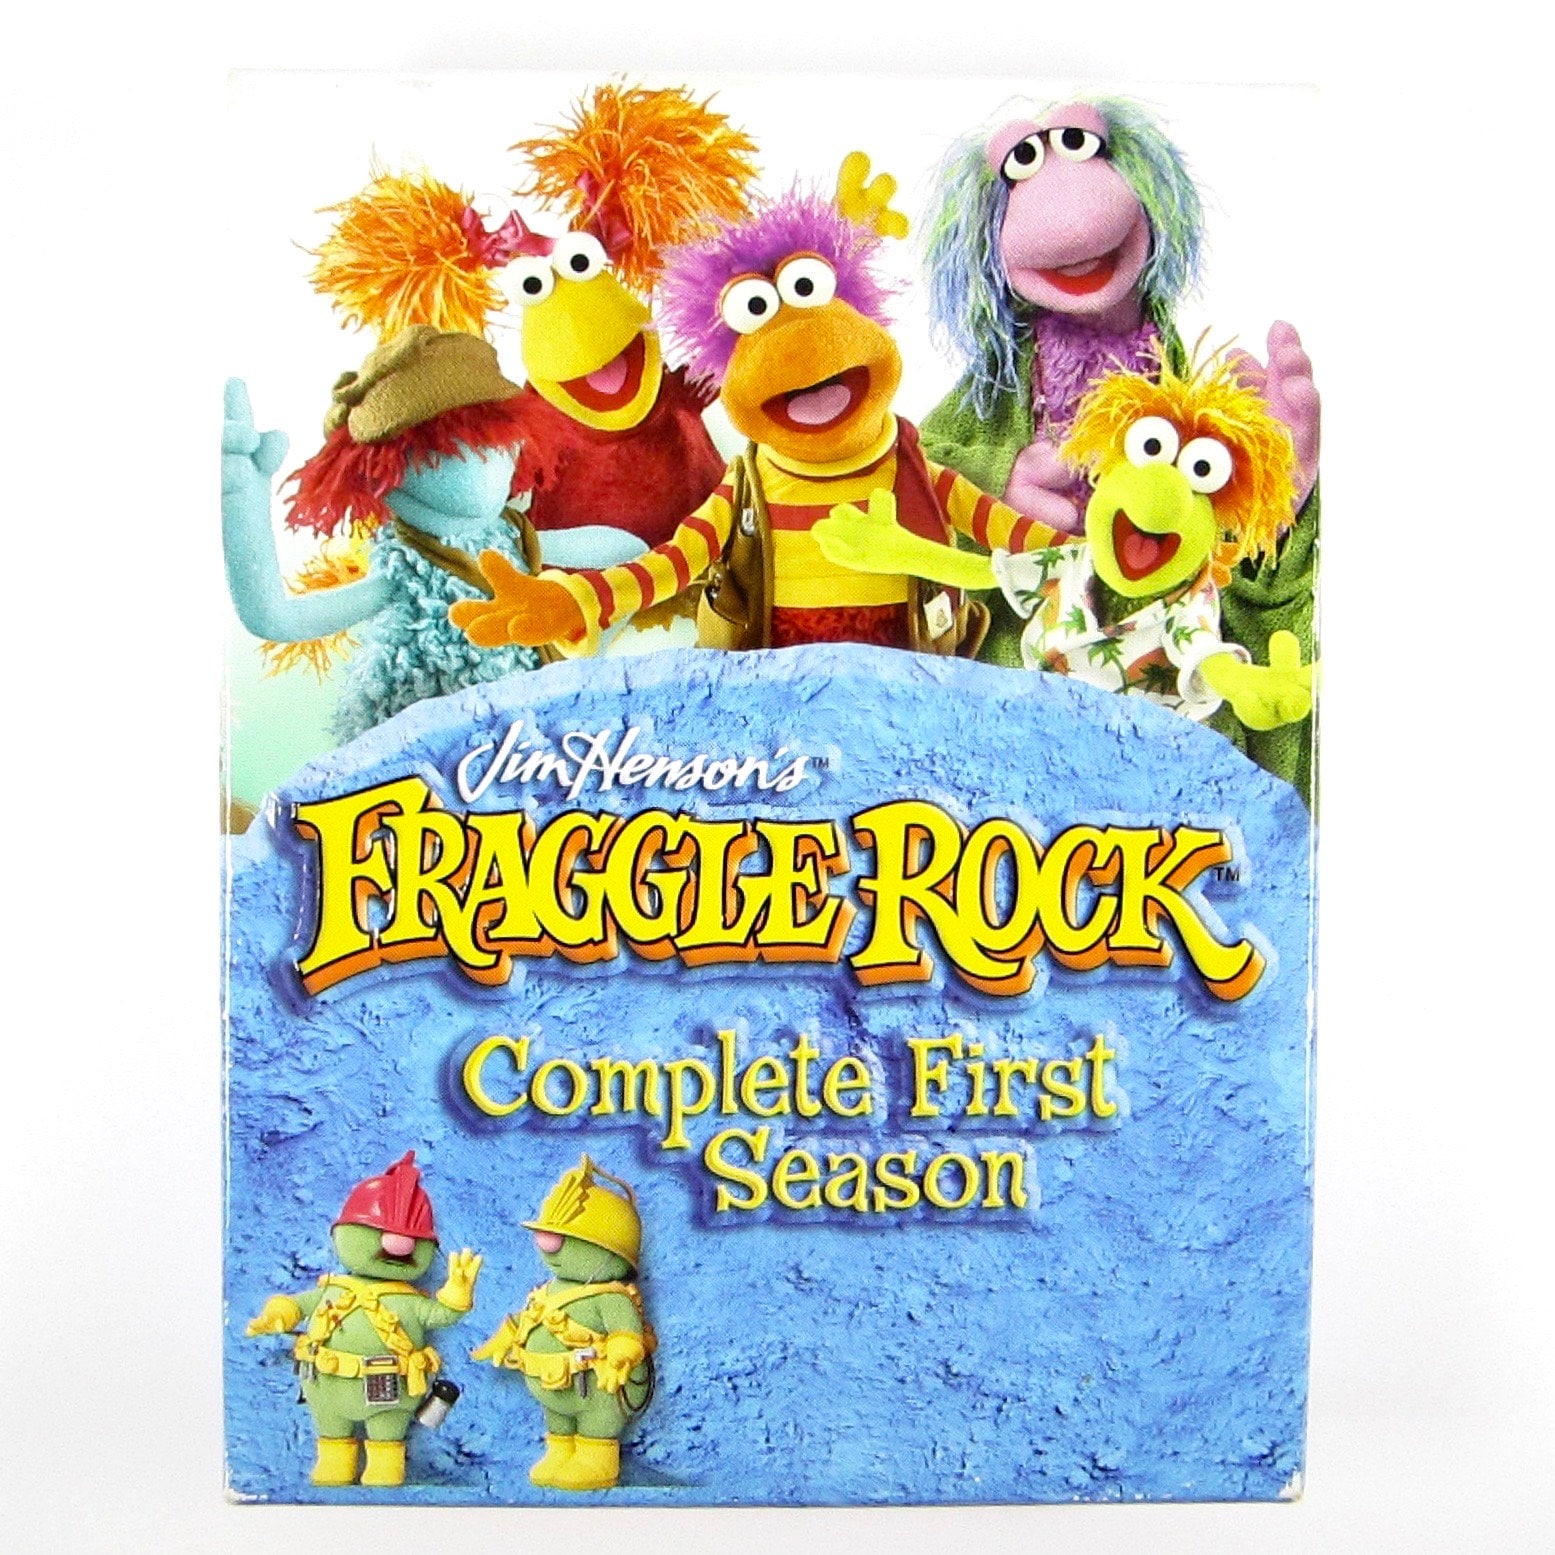 Fraggle Rock: Complete First Season [DVD] [Import]